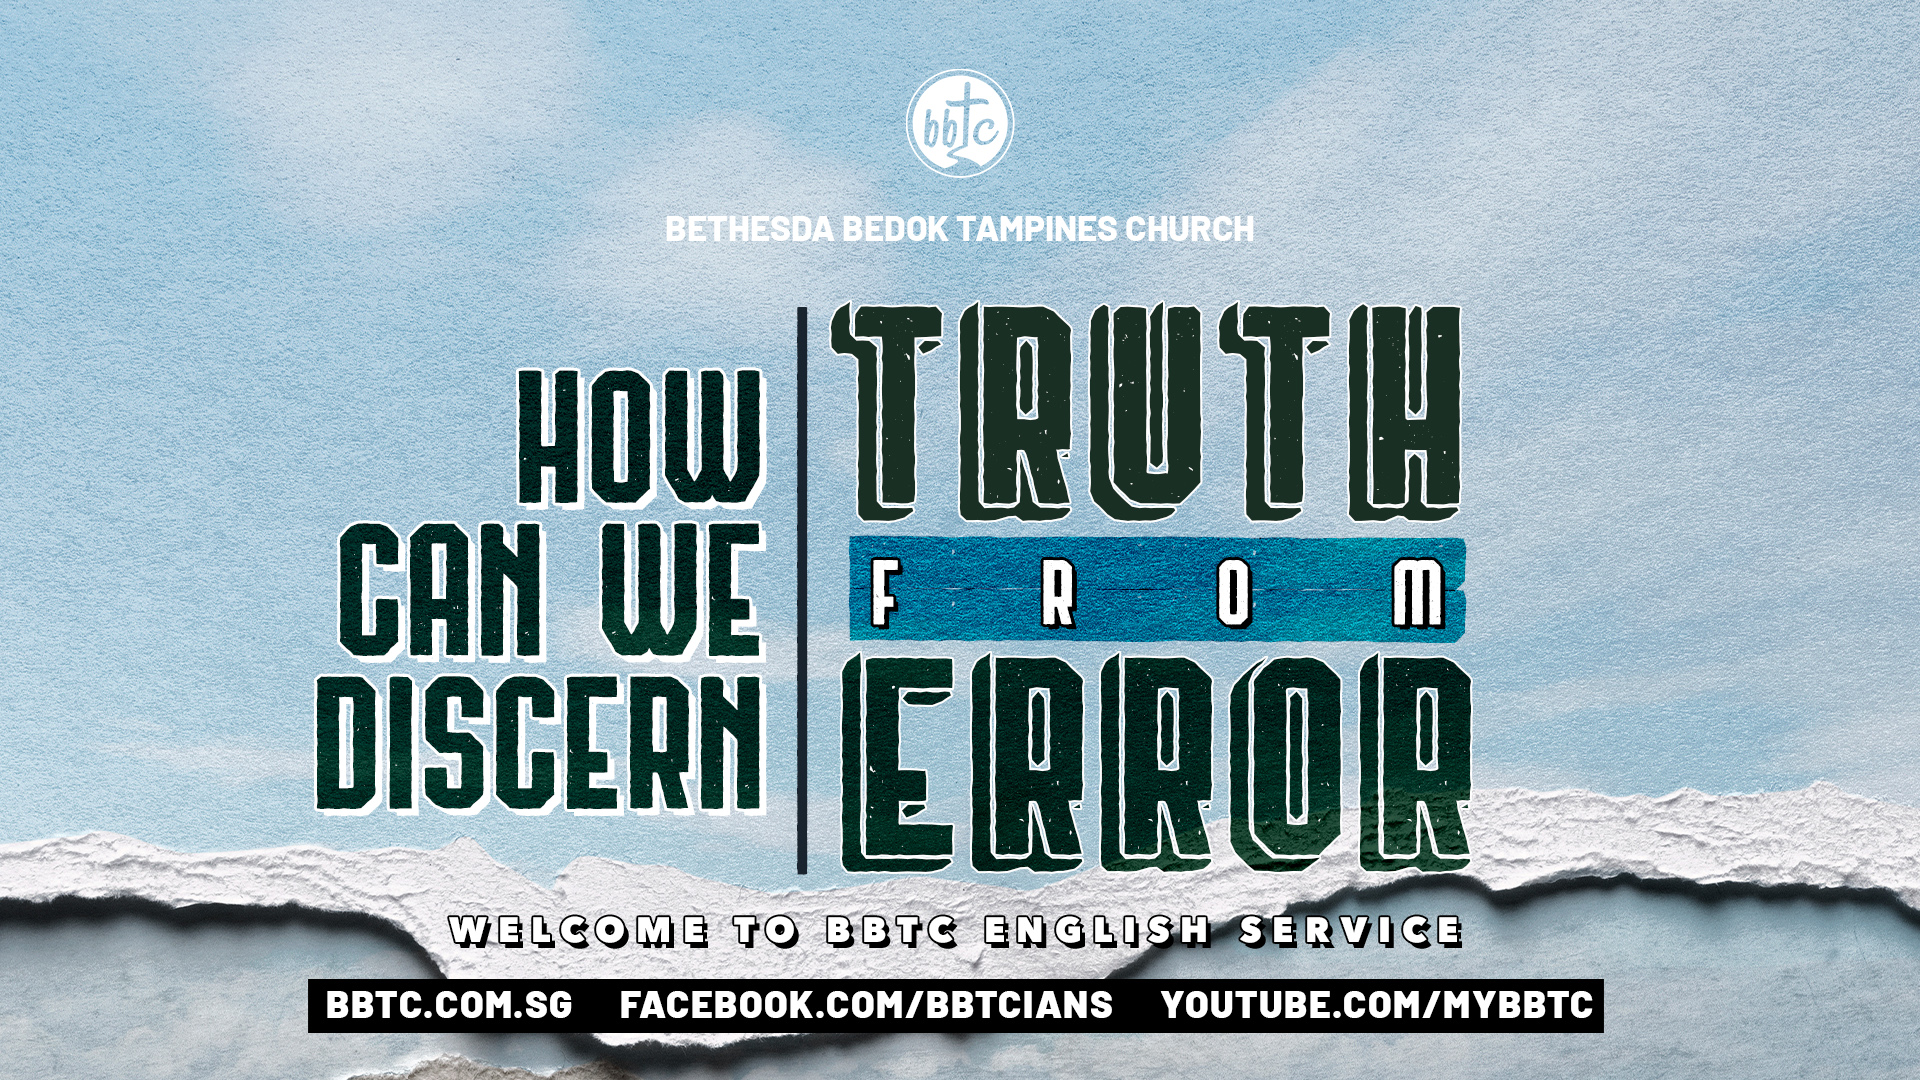 HOW CAN WE DISCERN TRUTH FROM ERROR?